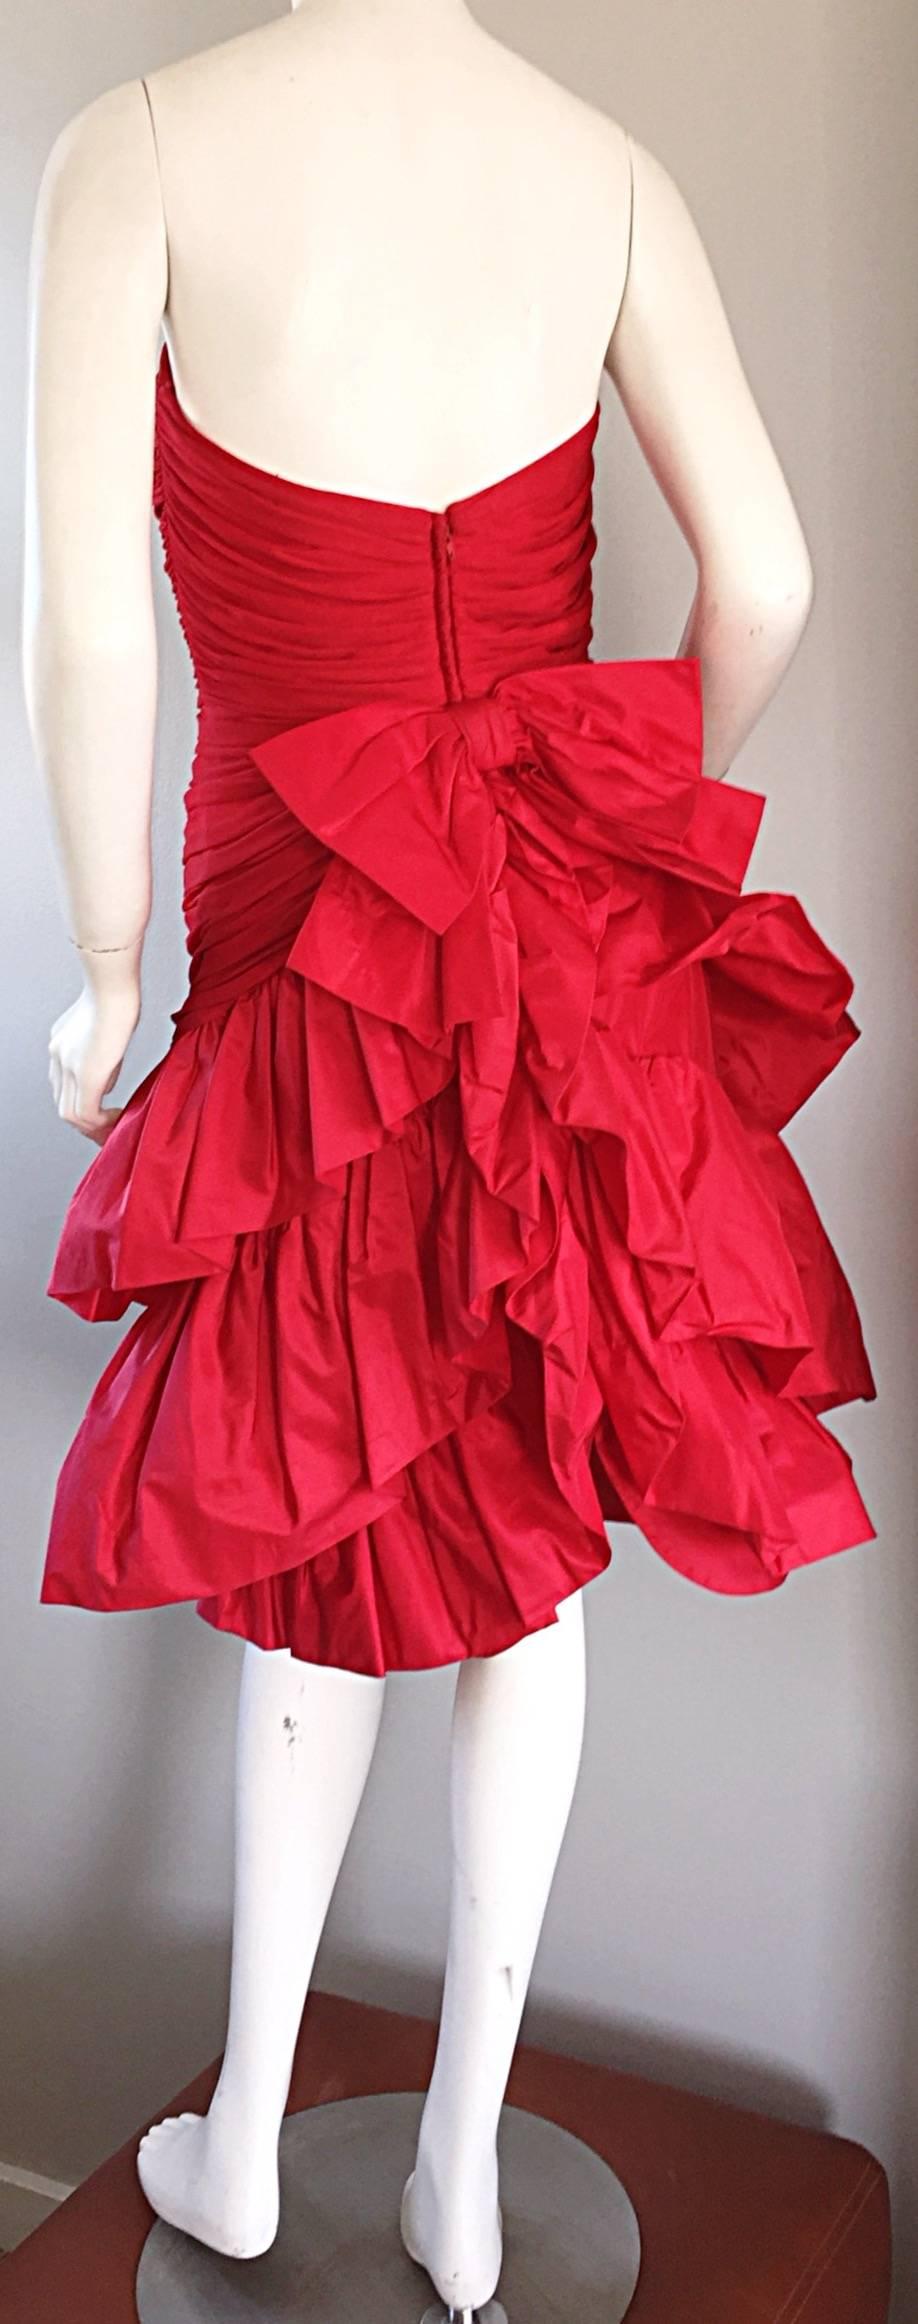 saks fifth avenue red dress